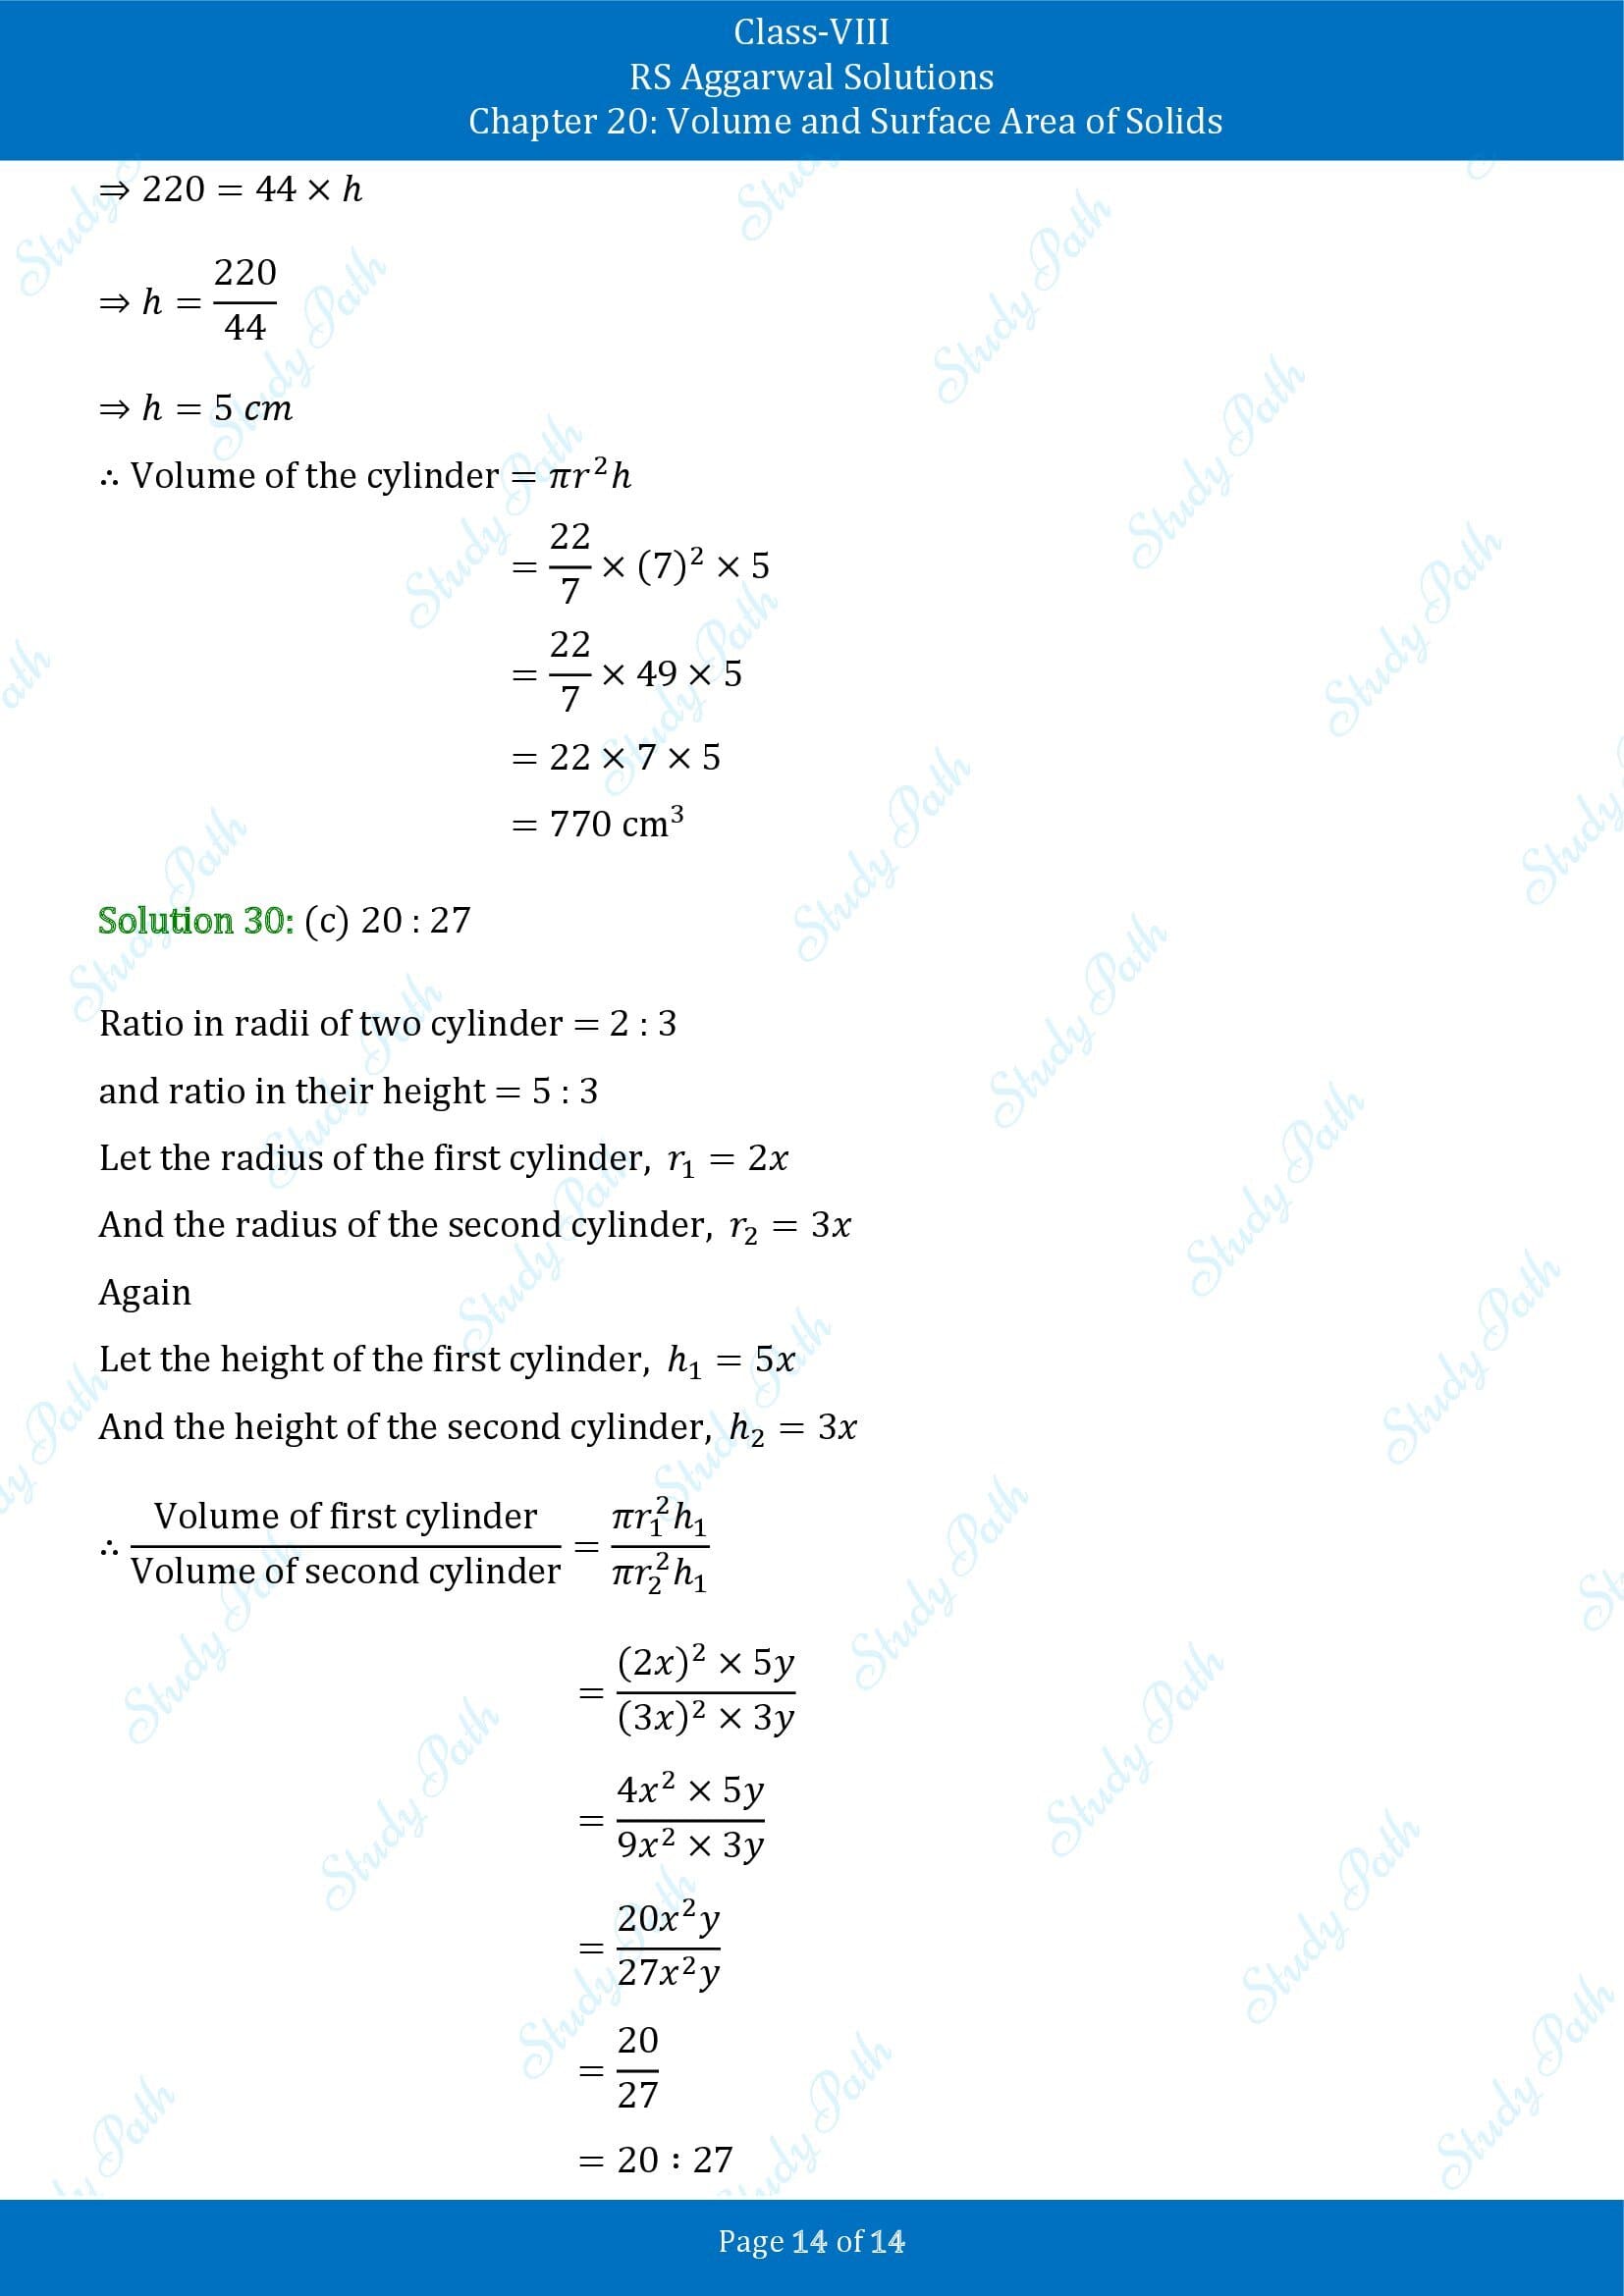 RS Aggarwal Solutions Class 8 Chapter 20 Volume and Surface Area of Solids Exercise 20C MCQs 00014